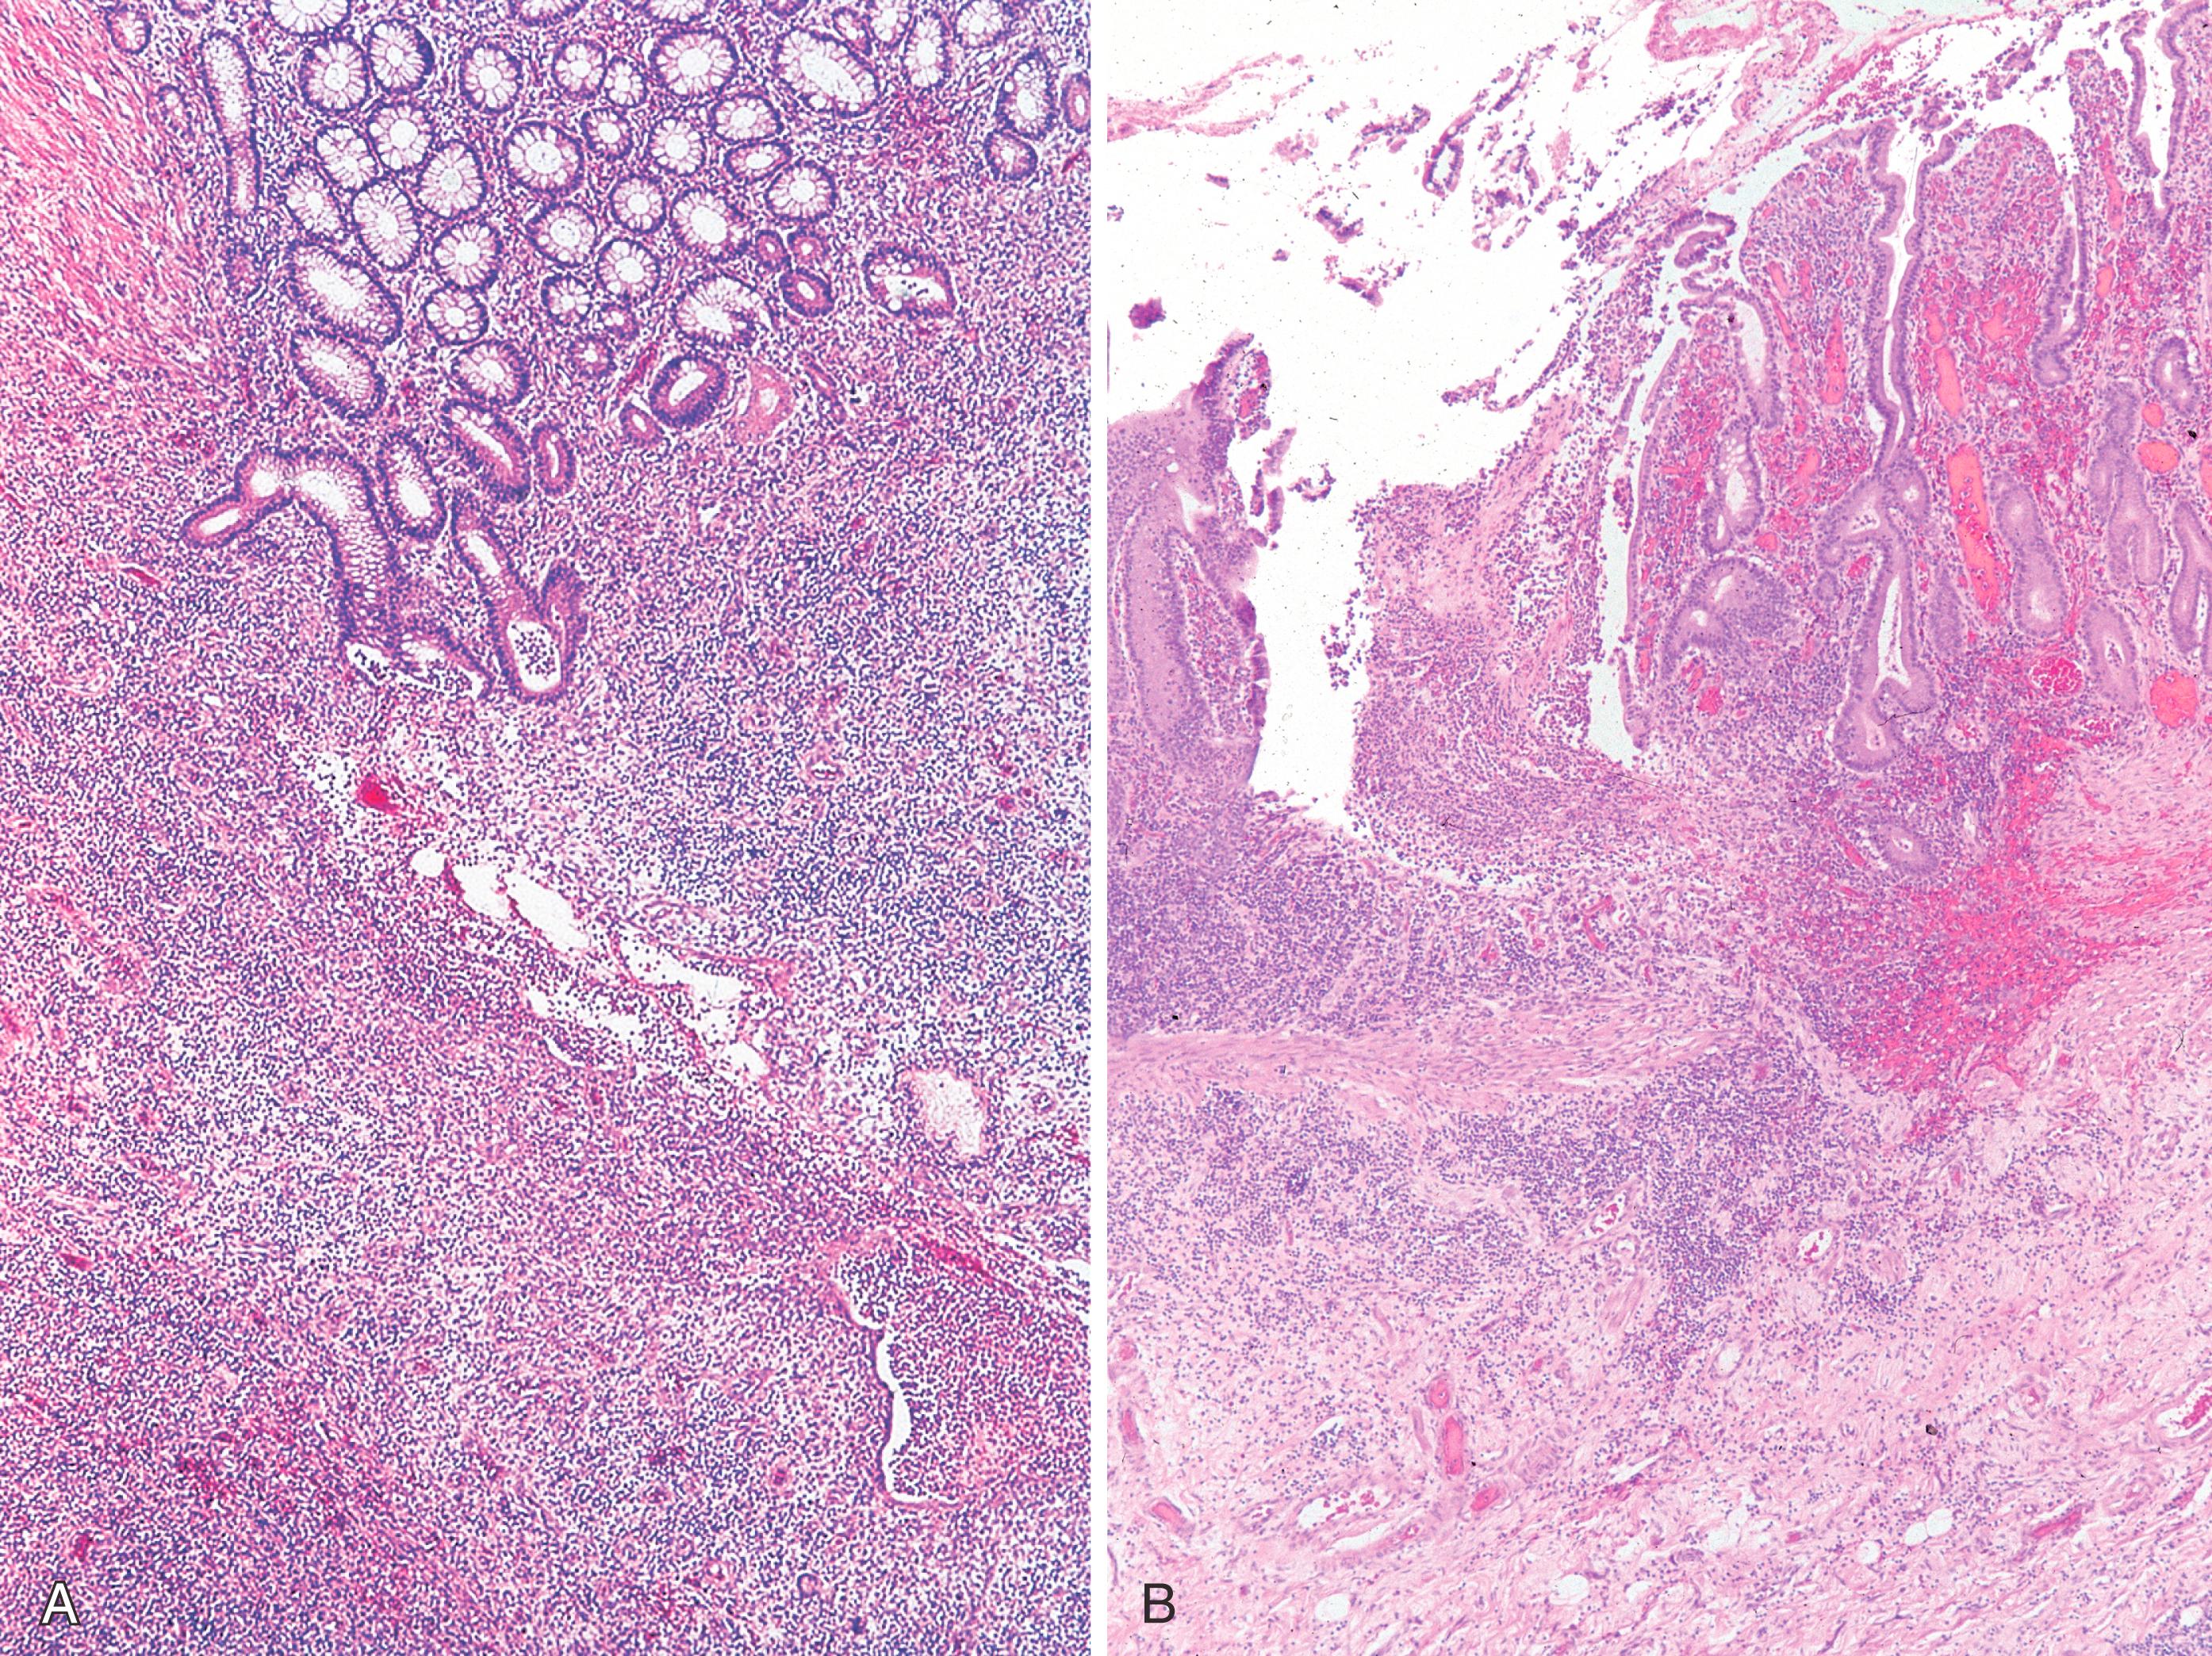 FIGURE 5.1, A–B, A chronic inflammatory disorder with fissuring necrosis and small-intestinal ulcers resembling Crohn’s disease occurs in some patients with X-linked agammaglobulinemia. Granulomas are typically absent (H&E stain).